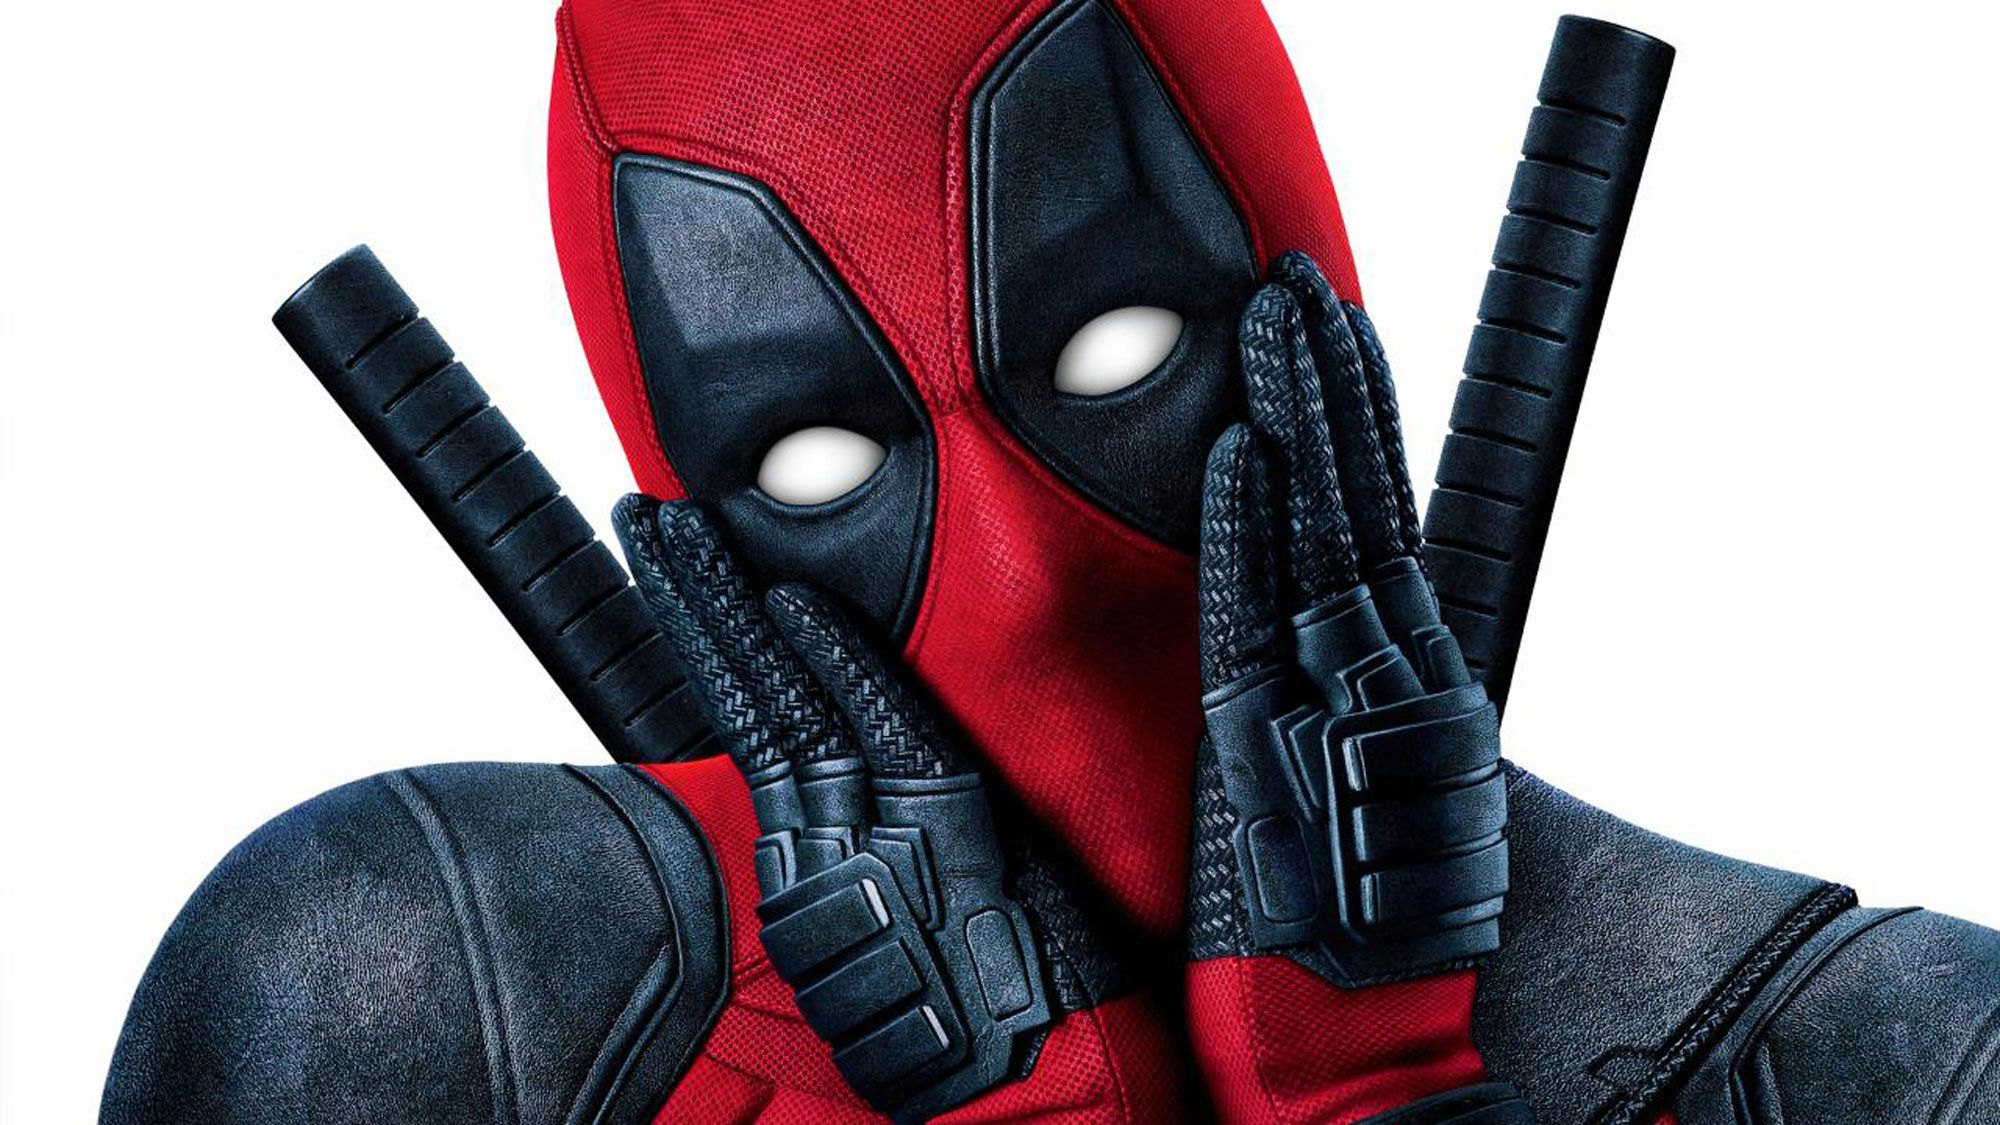 Deadpool 3' will not be 'Disney-fied,' says writer